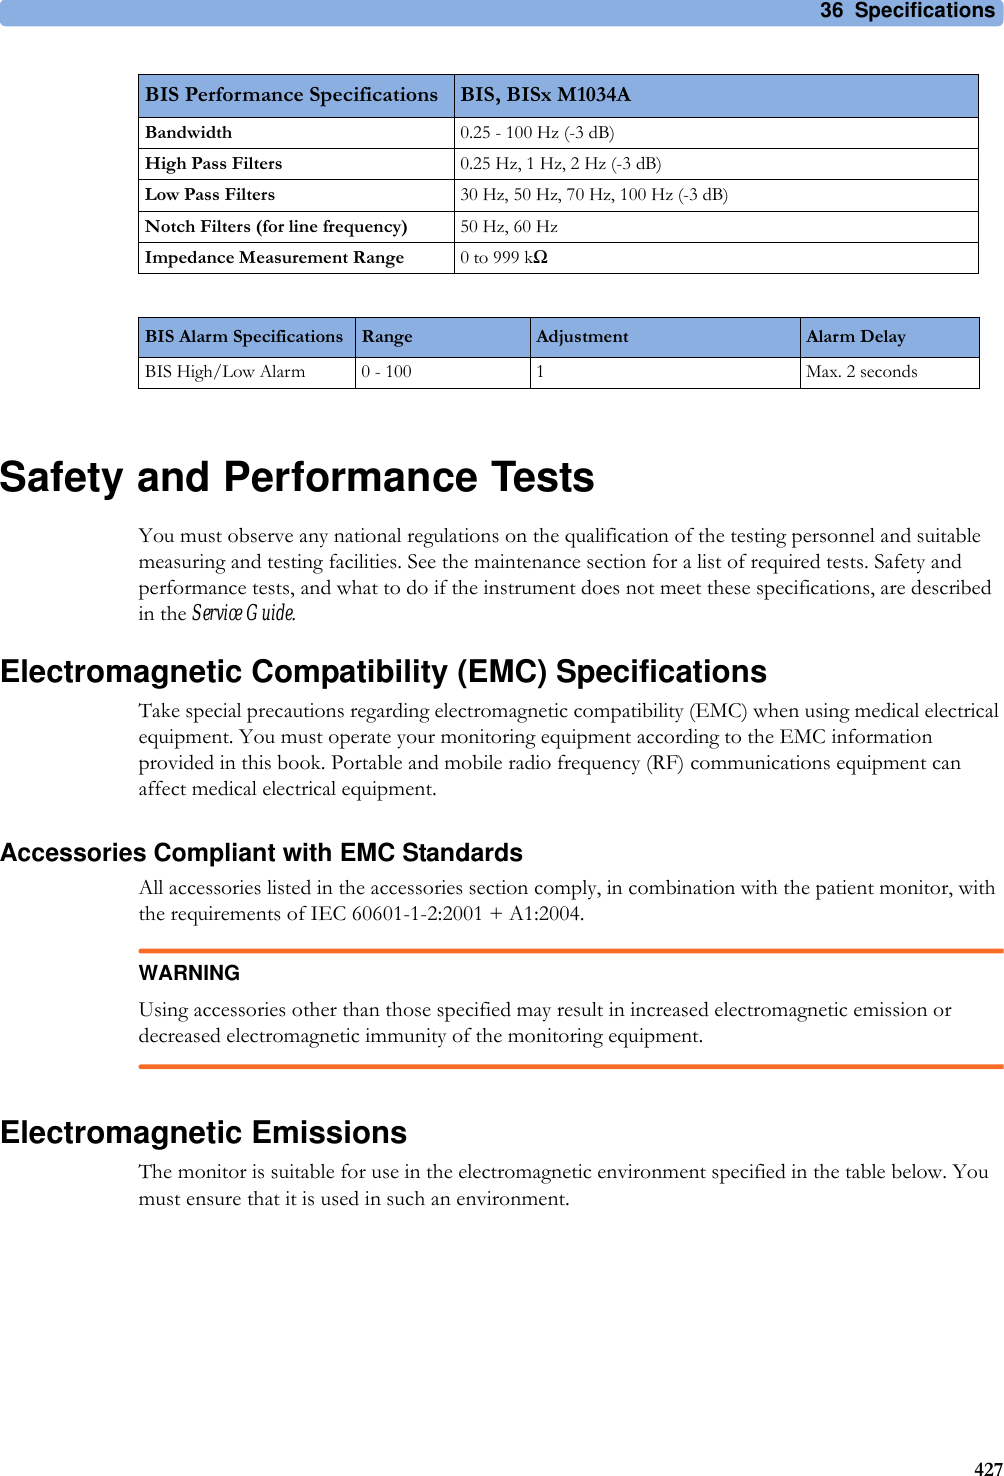 36 Specifications427Safety and Performance TestsYou must observe any national regulations on the qualification of the testing personnel and suitable measuring and testing facilities. See the maintenance section for a list of required tests. Safety and performance tests, and what to do if the instrument does not meet these specifications, are described in the Service Guide.Electromagnetic Compatibility (EMC) SpecificationsTake special precautions regarding electromagnetic compatibility (EMC) when using medical electrical equipment. You must operate your monitoring equipment according to the EMC information provided in this book. Portable and mobile radio frequency (RF) communications equipment can affect medical electrical equipment.Accessories Compliant with EMC StandardsAll accessories listed in the accessories section comply, in combination with the patient monitor, with the requirements of IEC 60601-1-2:2001 + A1:2004.WARNINGUsing accessories other than those specified may result in increased electromagnetic emission or decreased electromagnetic immunity of the monitoring equipment.Electromagnetic EmissionsThe monitor is suitable for use in the electromagnetic environment specified in the table below. You must ensure that it is used in such an environment.Bandwidth 0.25 - 100 Hz (-3 dB)High Pass Filters 0.25Hz, 1Hz, 2Hz (-3dB)Low Pass Filters 30 Hz, 50 Hz, 70 Hz, 100 Hz (-3 dB)Notch Filters (for line frequency) 50 Hz, 60 HzImpedance Measurement Range 0 to 999 kΩBIS Alarm Specifications Range Adjustment Alarm DelayBIS High/Low Alarm 0 - 100 1 Max. 2 secondsBIS Performance Specifications BIS, BISx M1034A